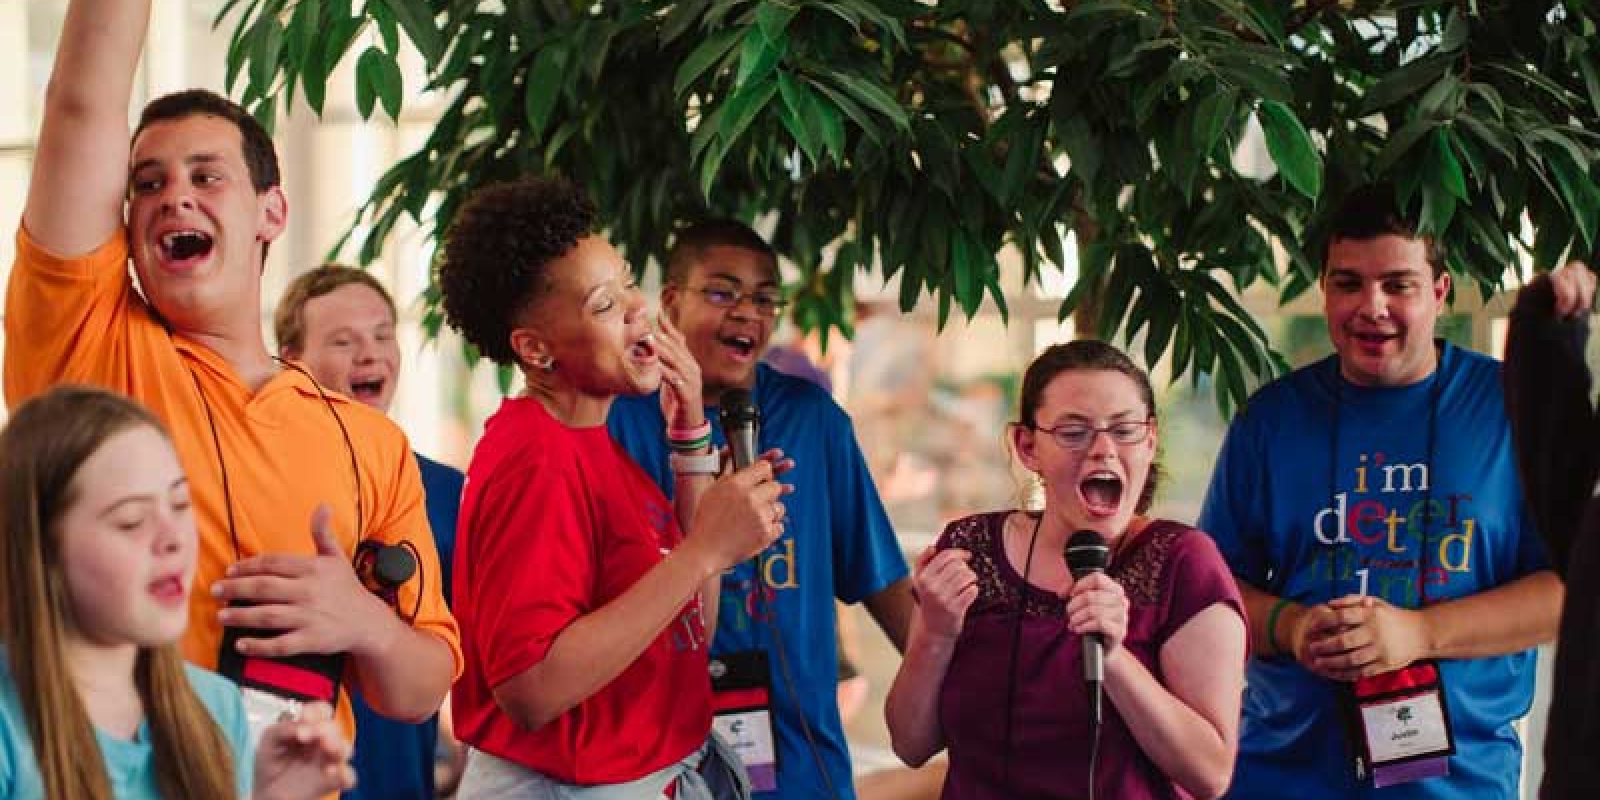 youth leaders in brightly colored shirts sing joyfully into microphones